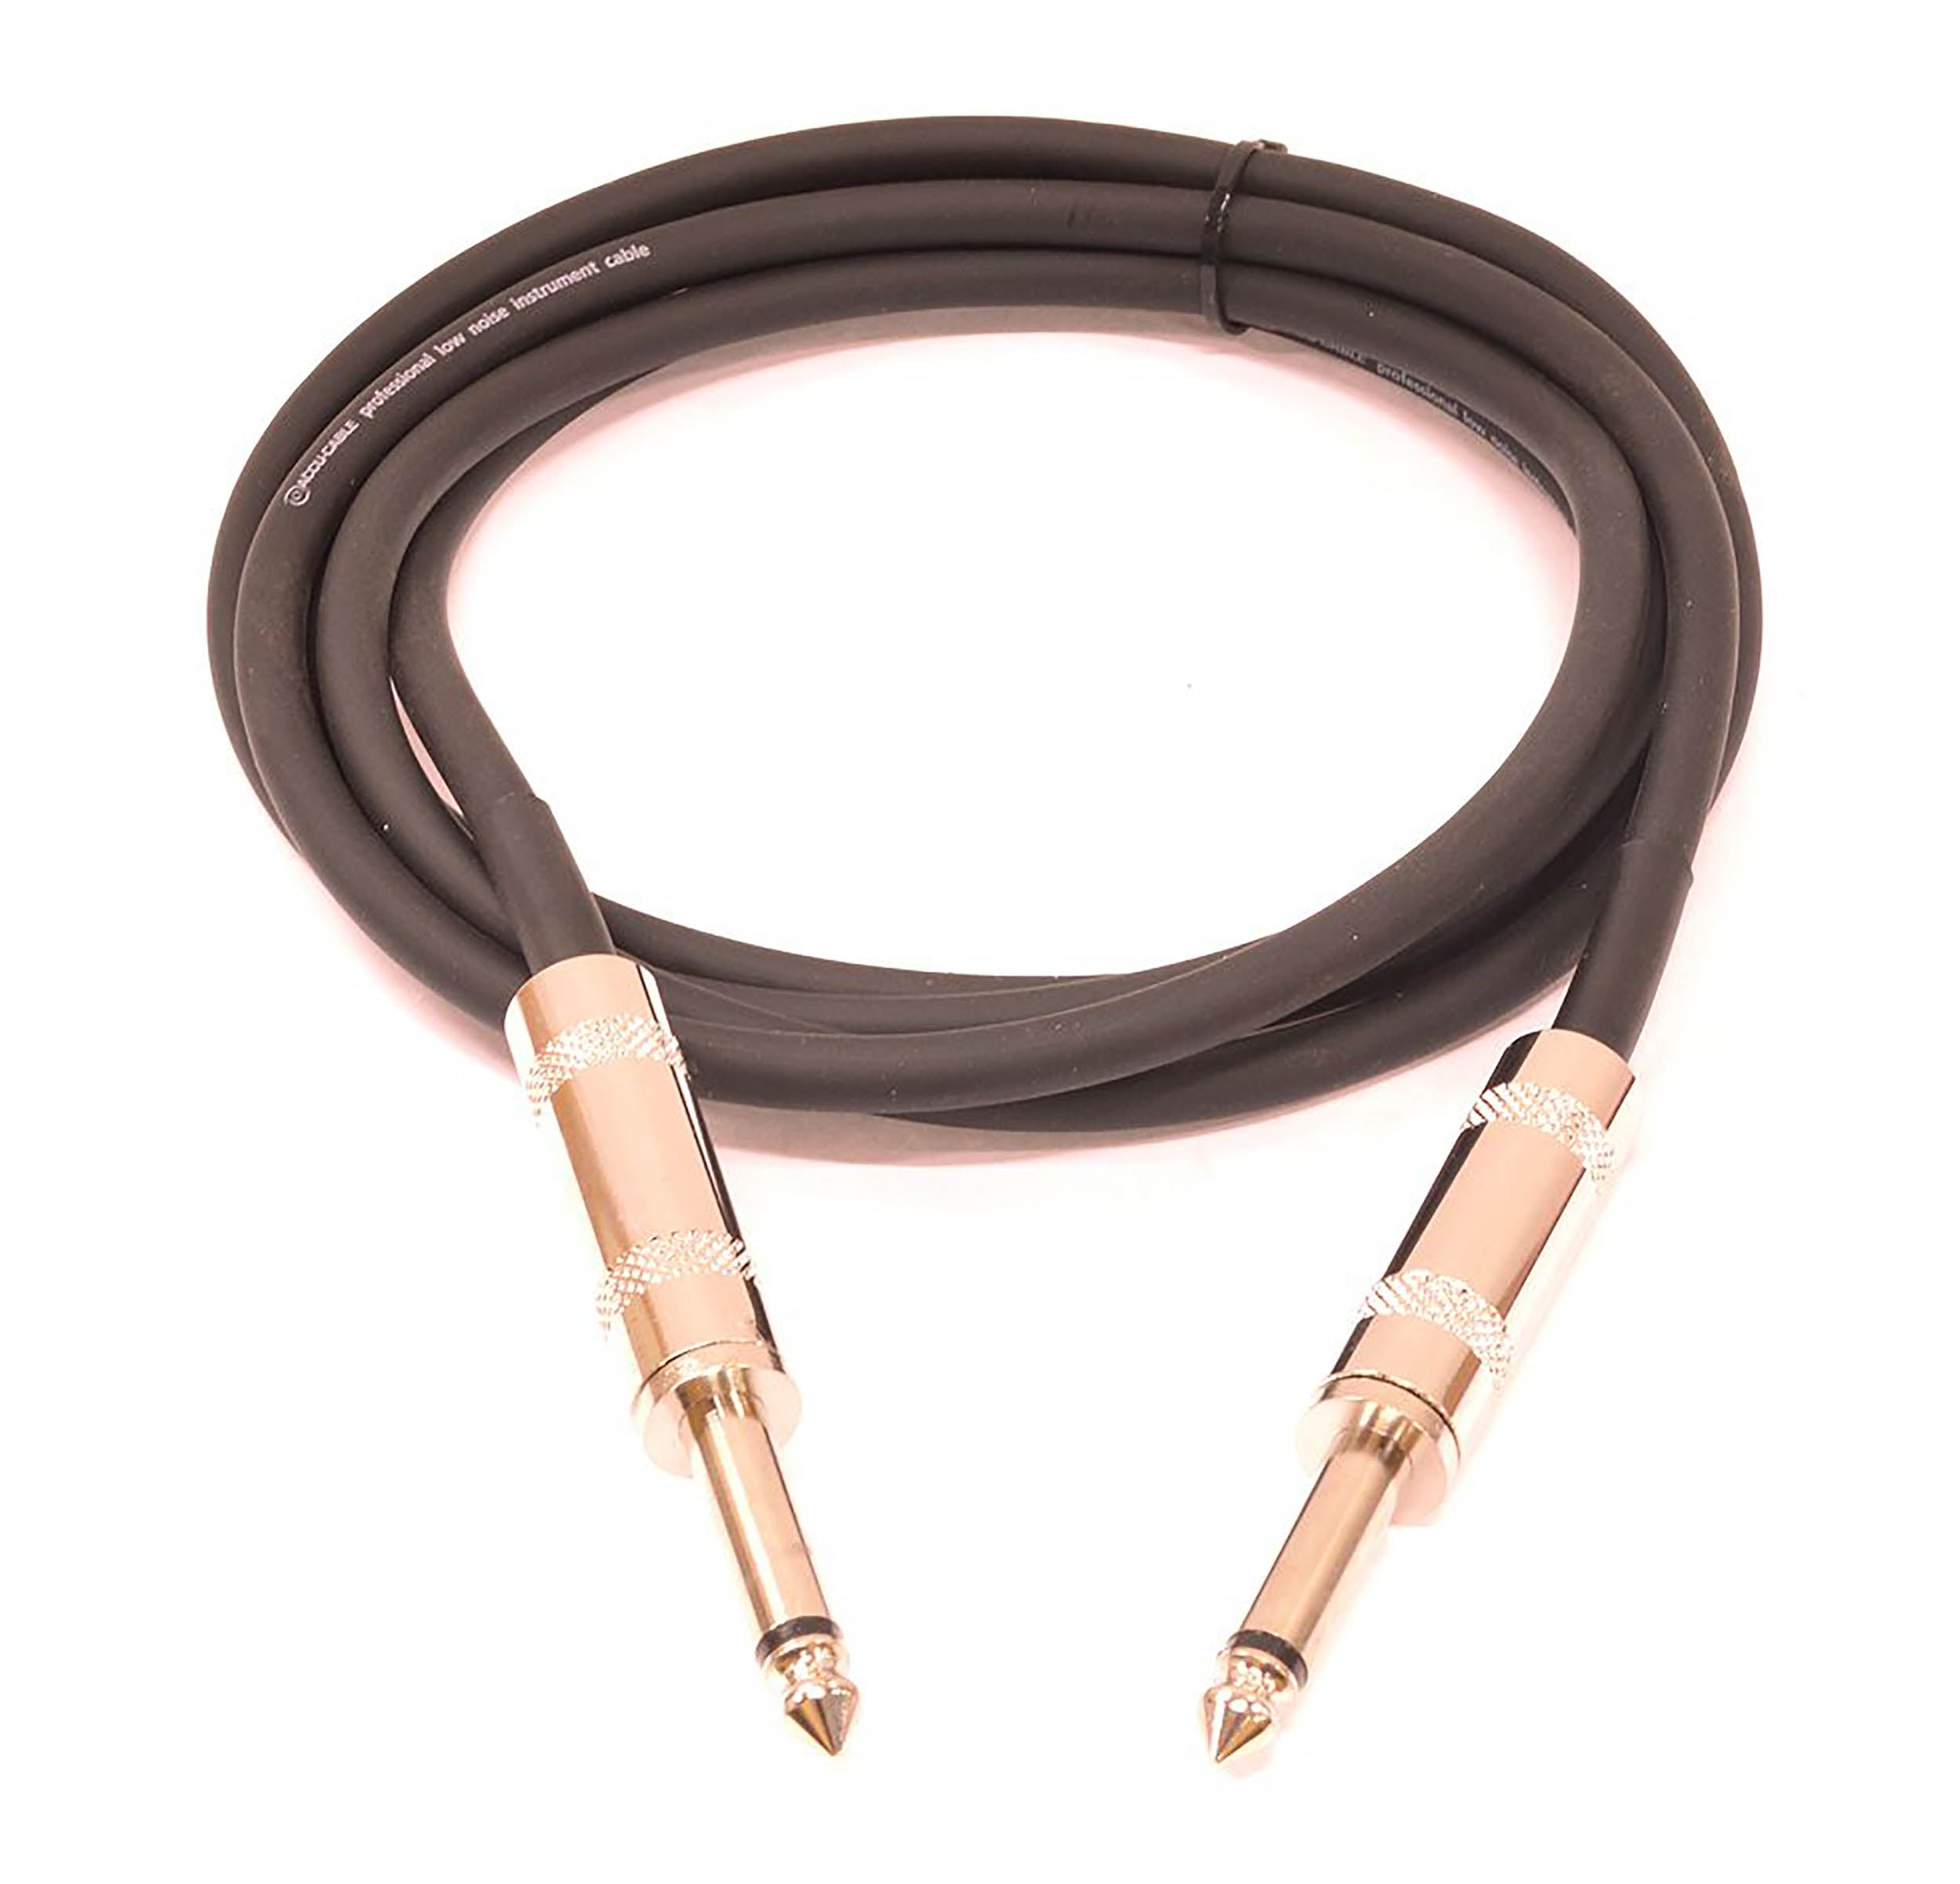 Accu-Cable QTR, 1/4-Inch Mono Male to 1/4-Inch Male Instrument Cable by Accu Cable